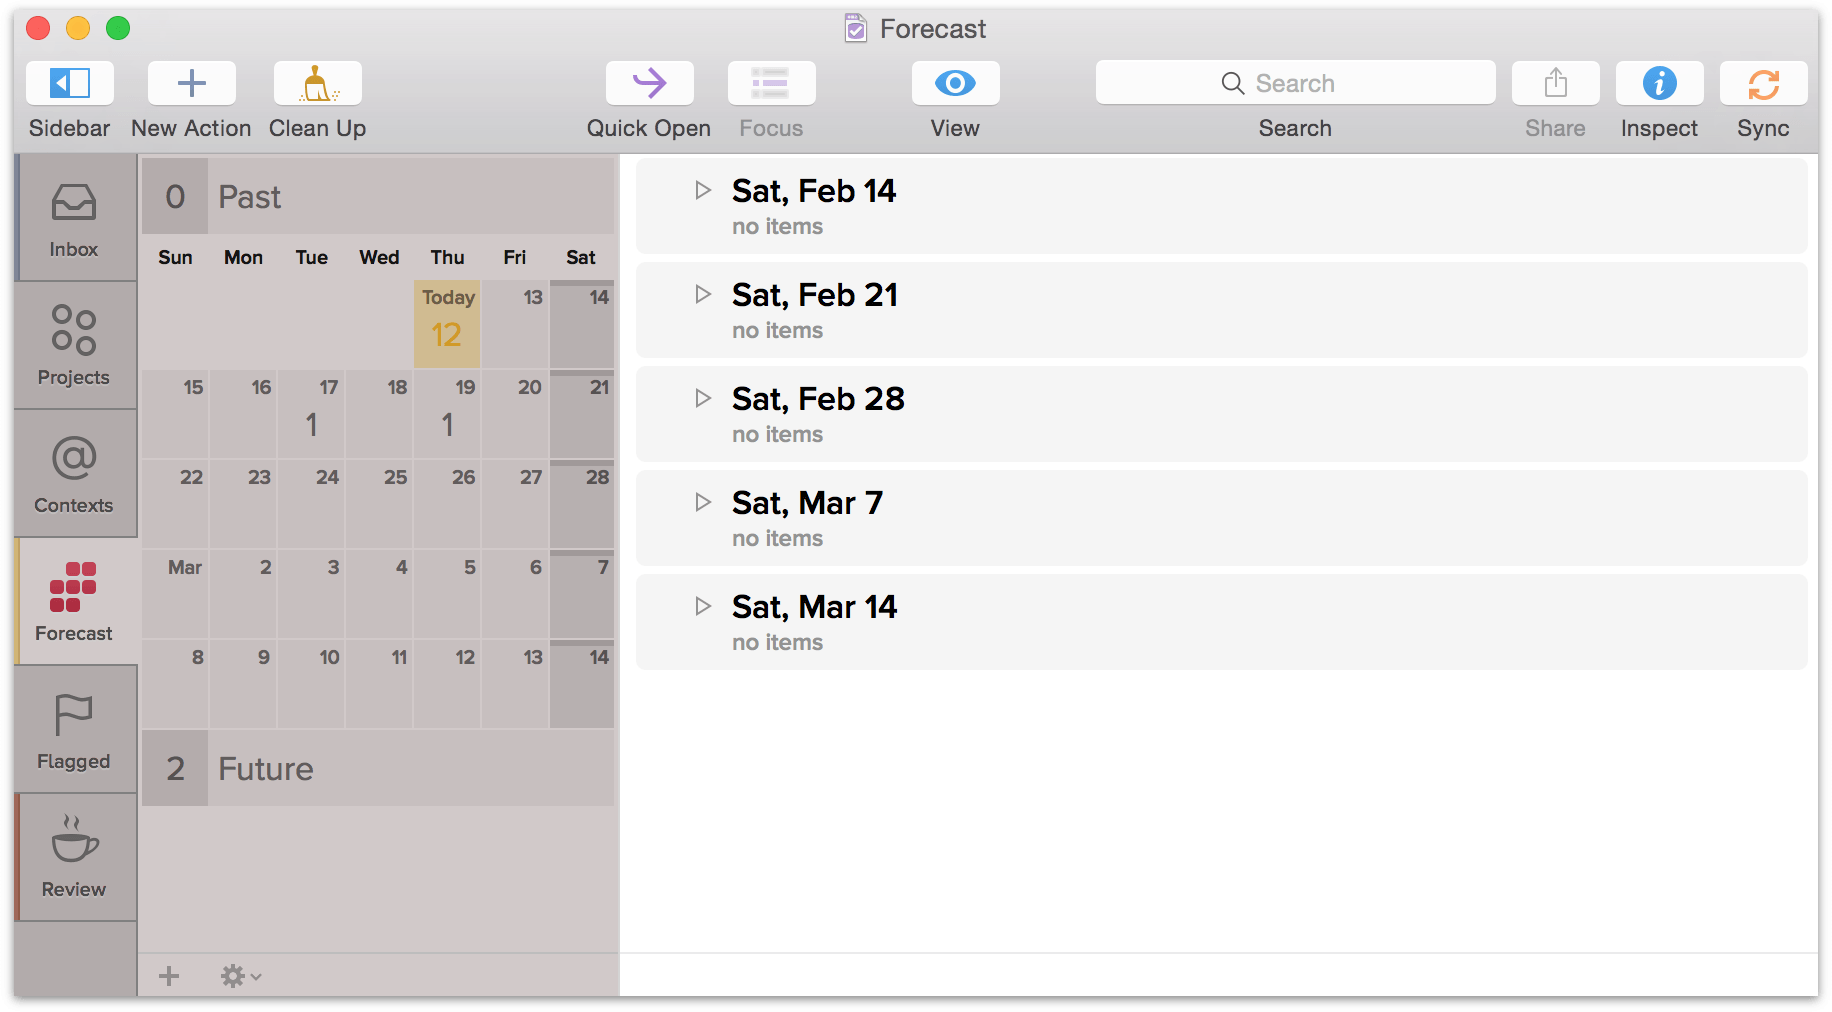 Command-click the dates you want so you can see what&#8217;s happening on those days